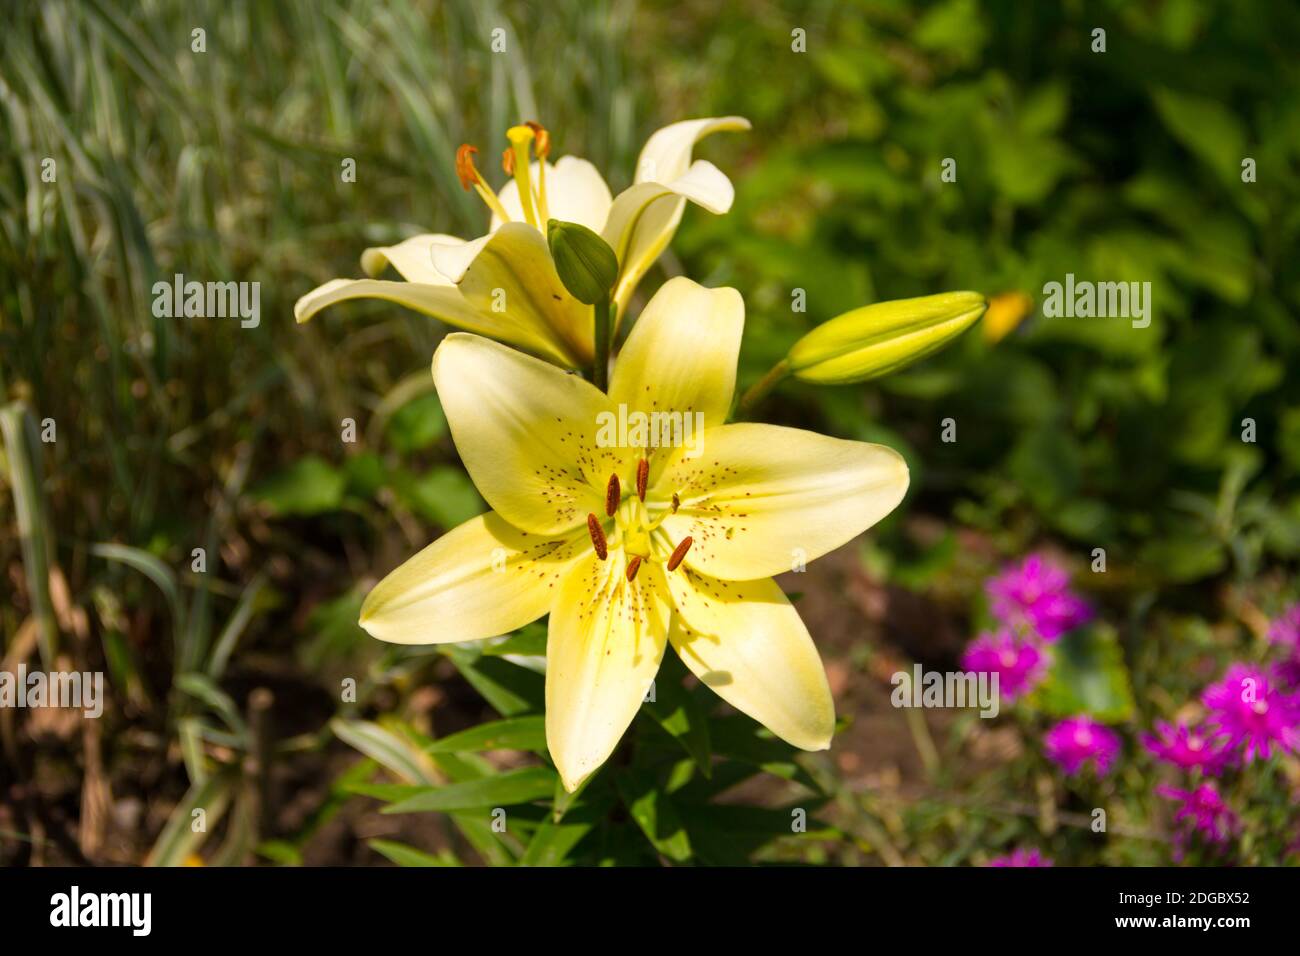 Solar tiger lily with open flowers and buds of a bright sunny day in the garden Stock Photo